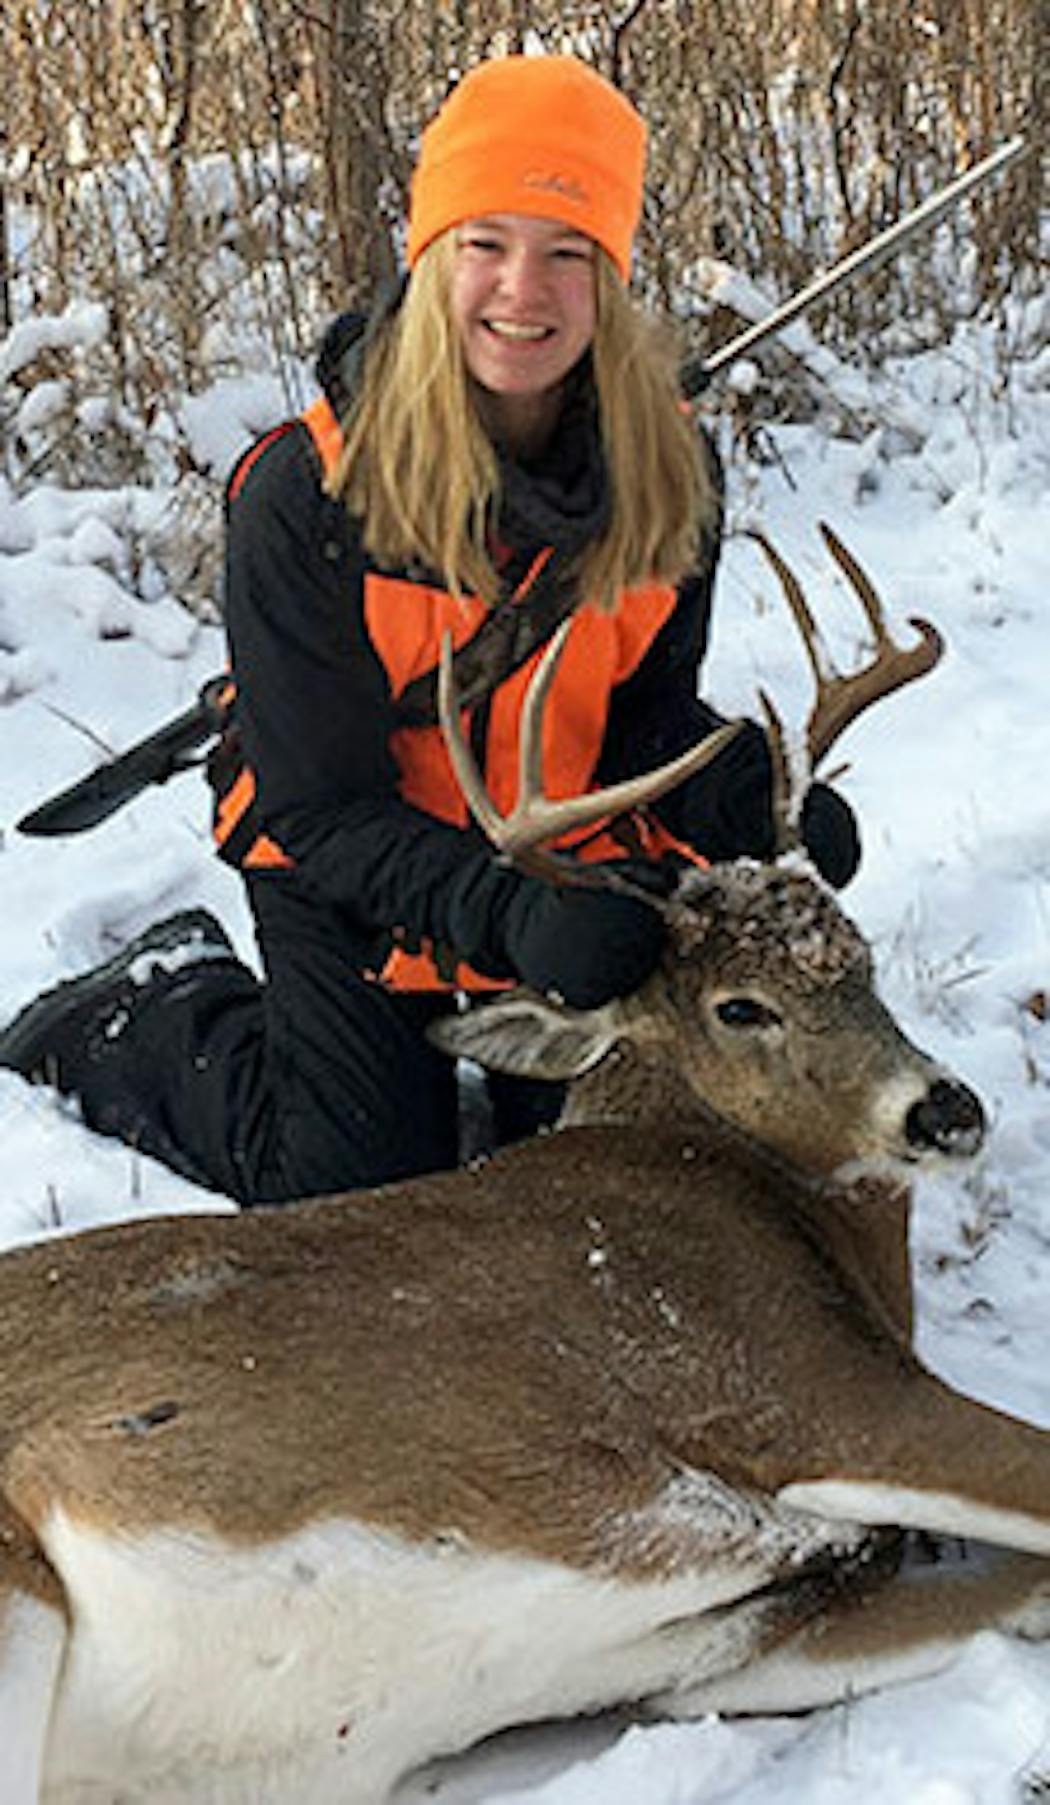 Leah Blomquist, 14, of Plymouth, took three long-range shots and made each one count to harvest this buck during the second weekend of Minnesota’s firearm deer season. She was in St. Louis County sitting next to her father, Alan, on his birthday.